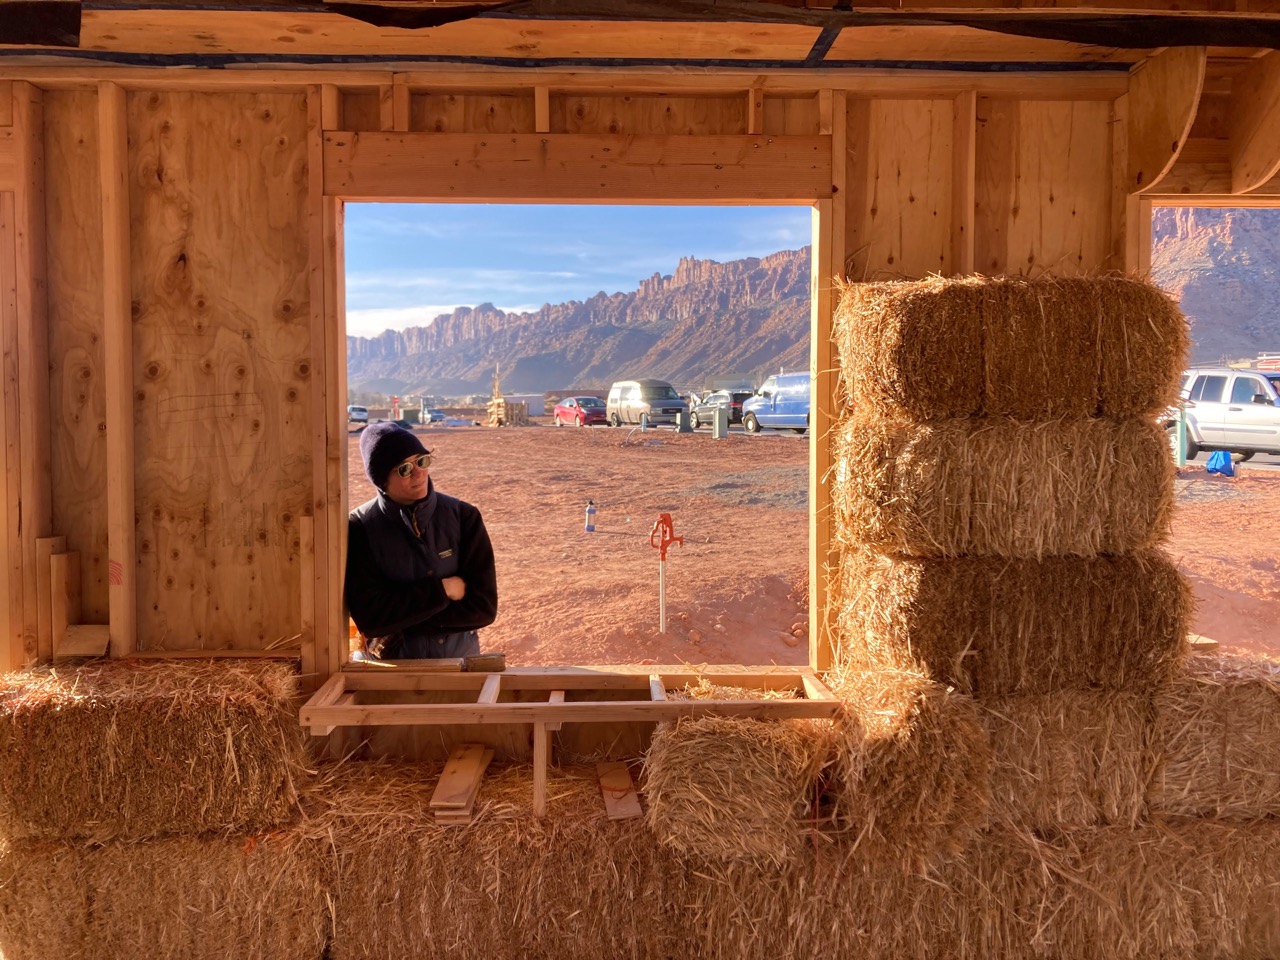 A person stands in the window of an under-construction straw bale home.